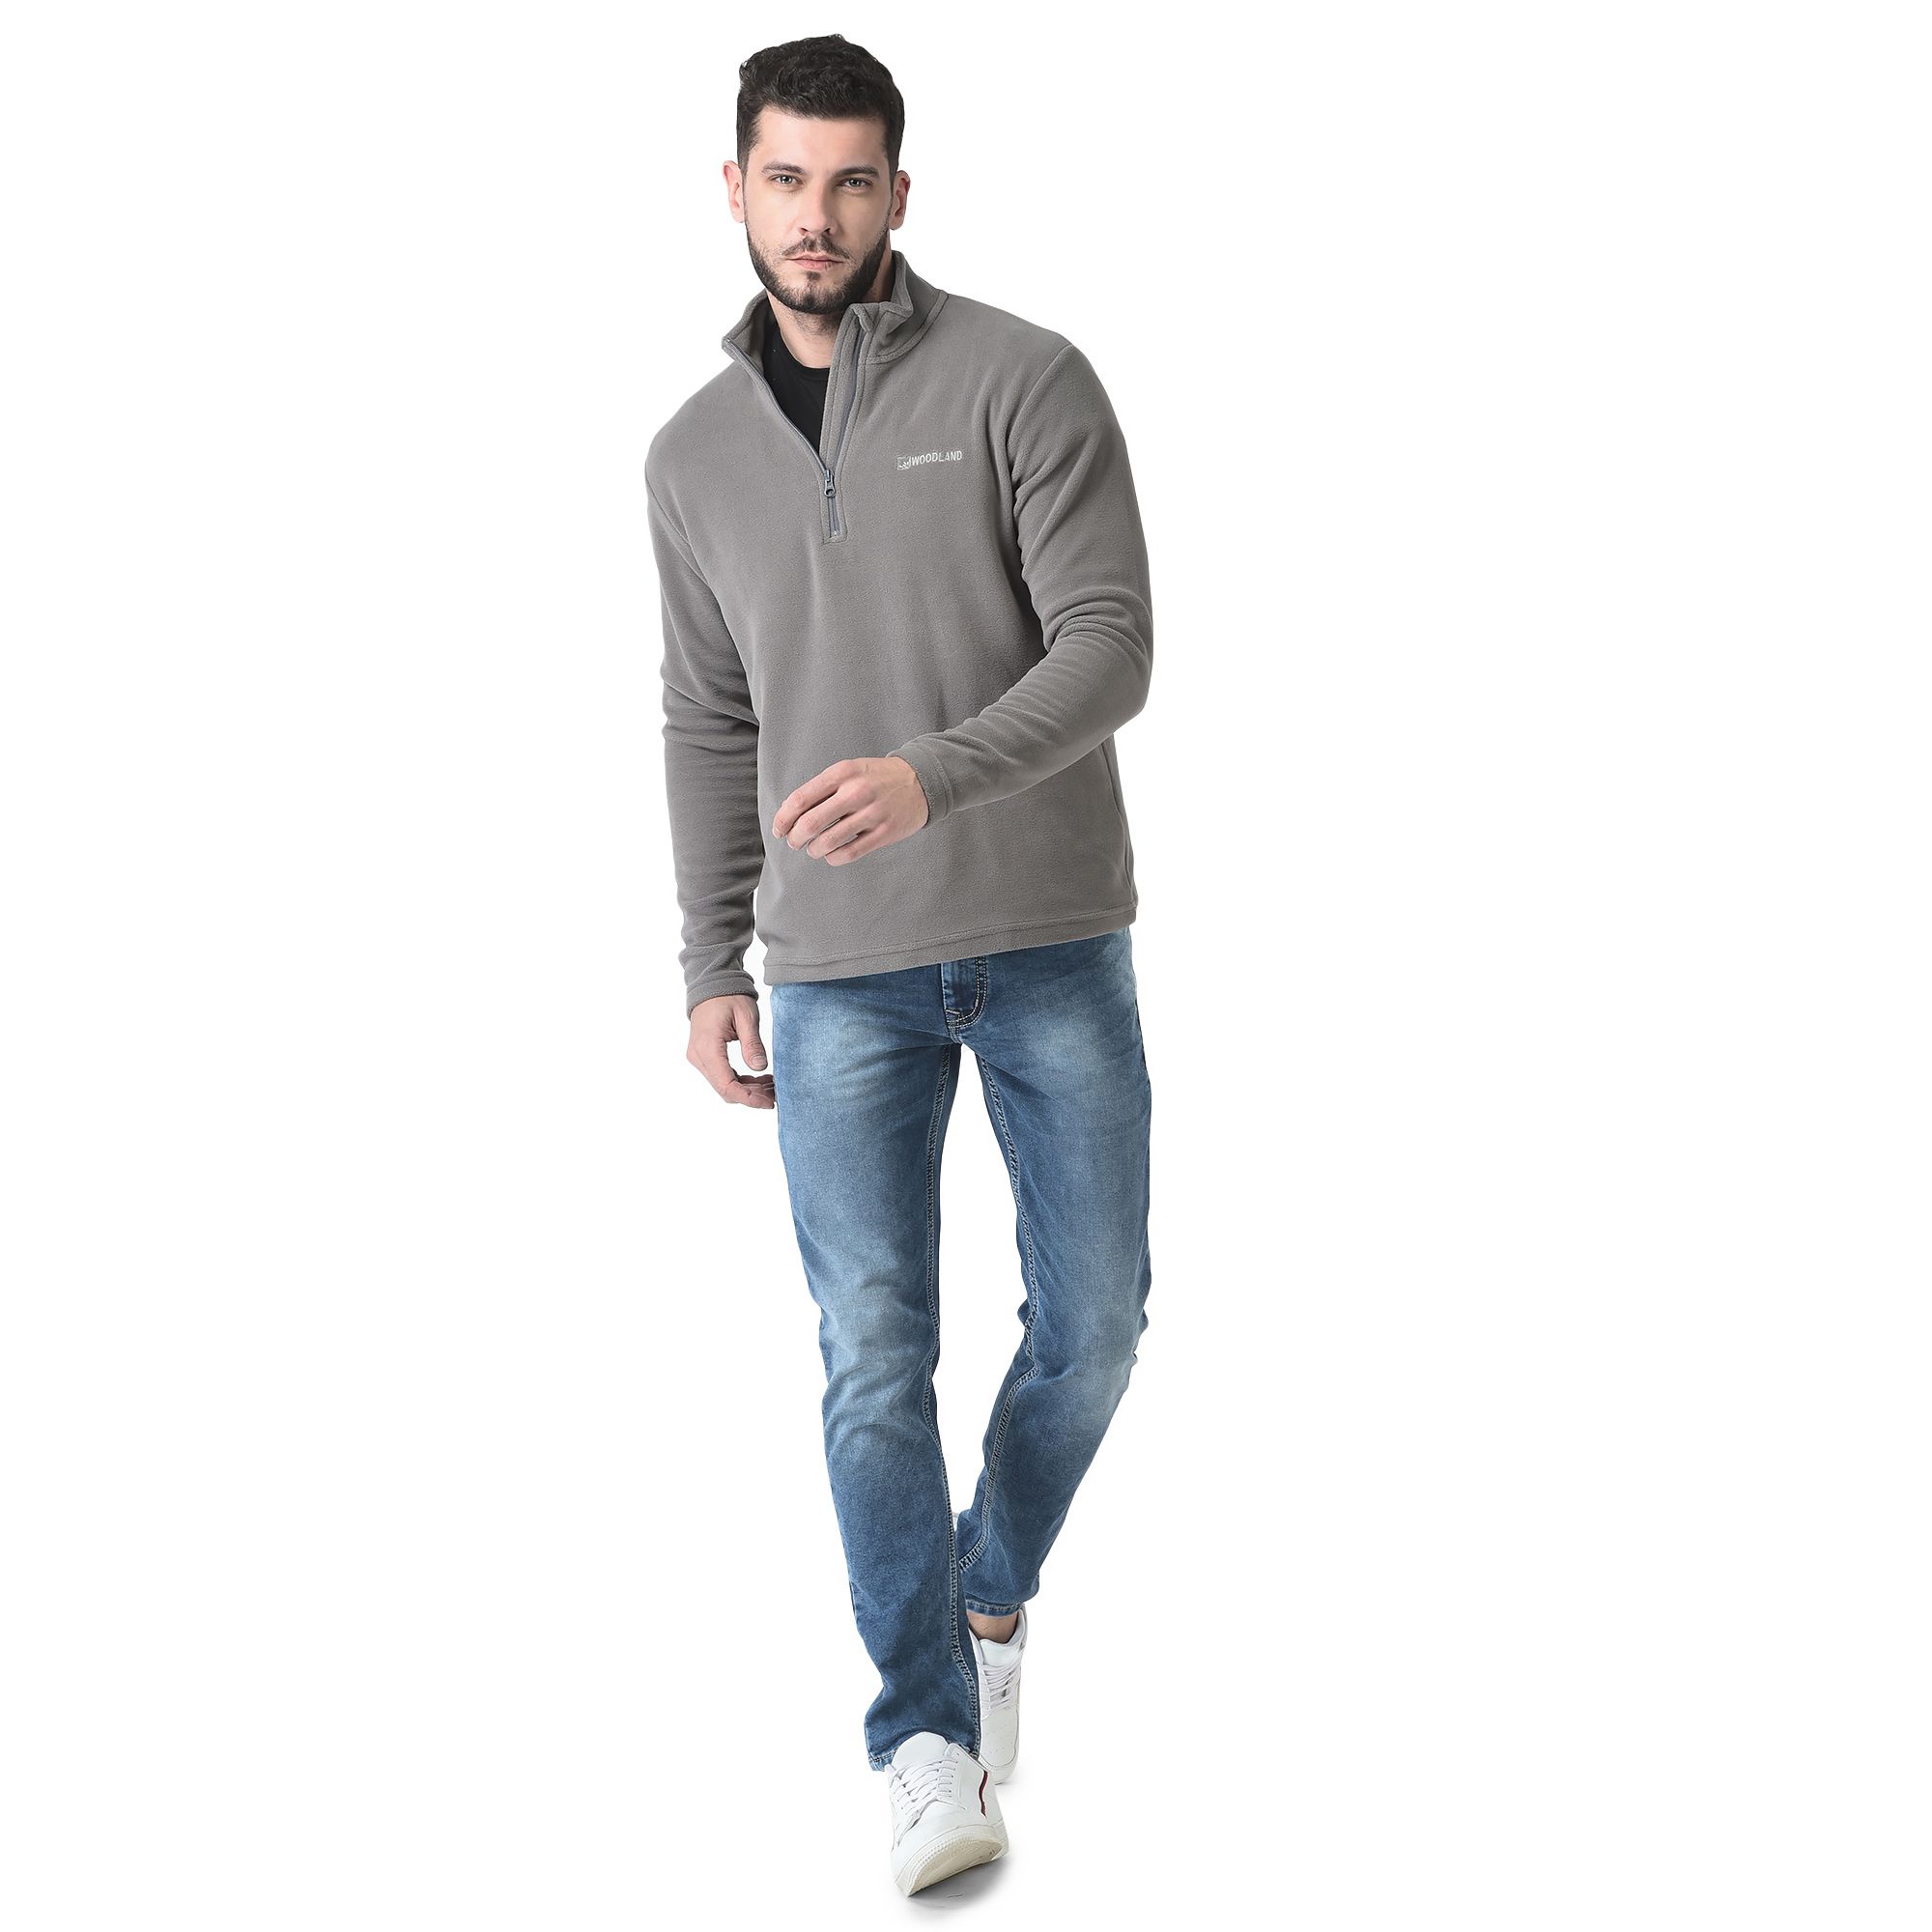 Fashionable woodland mens winter jackets For Comfort And Style - Alibaba.com-thanhphatduhoc.com.vn